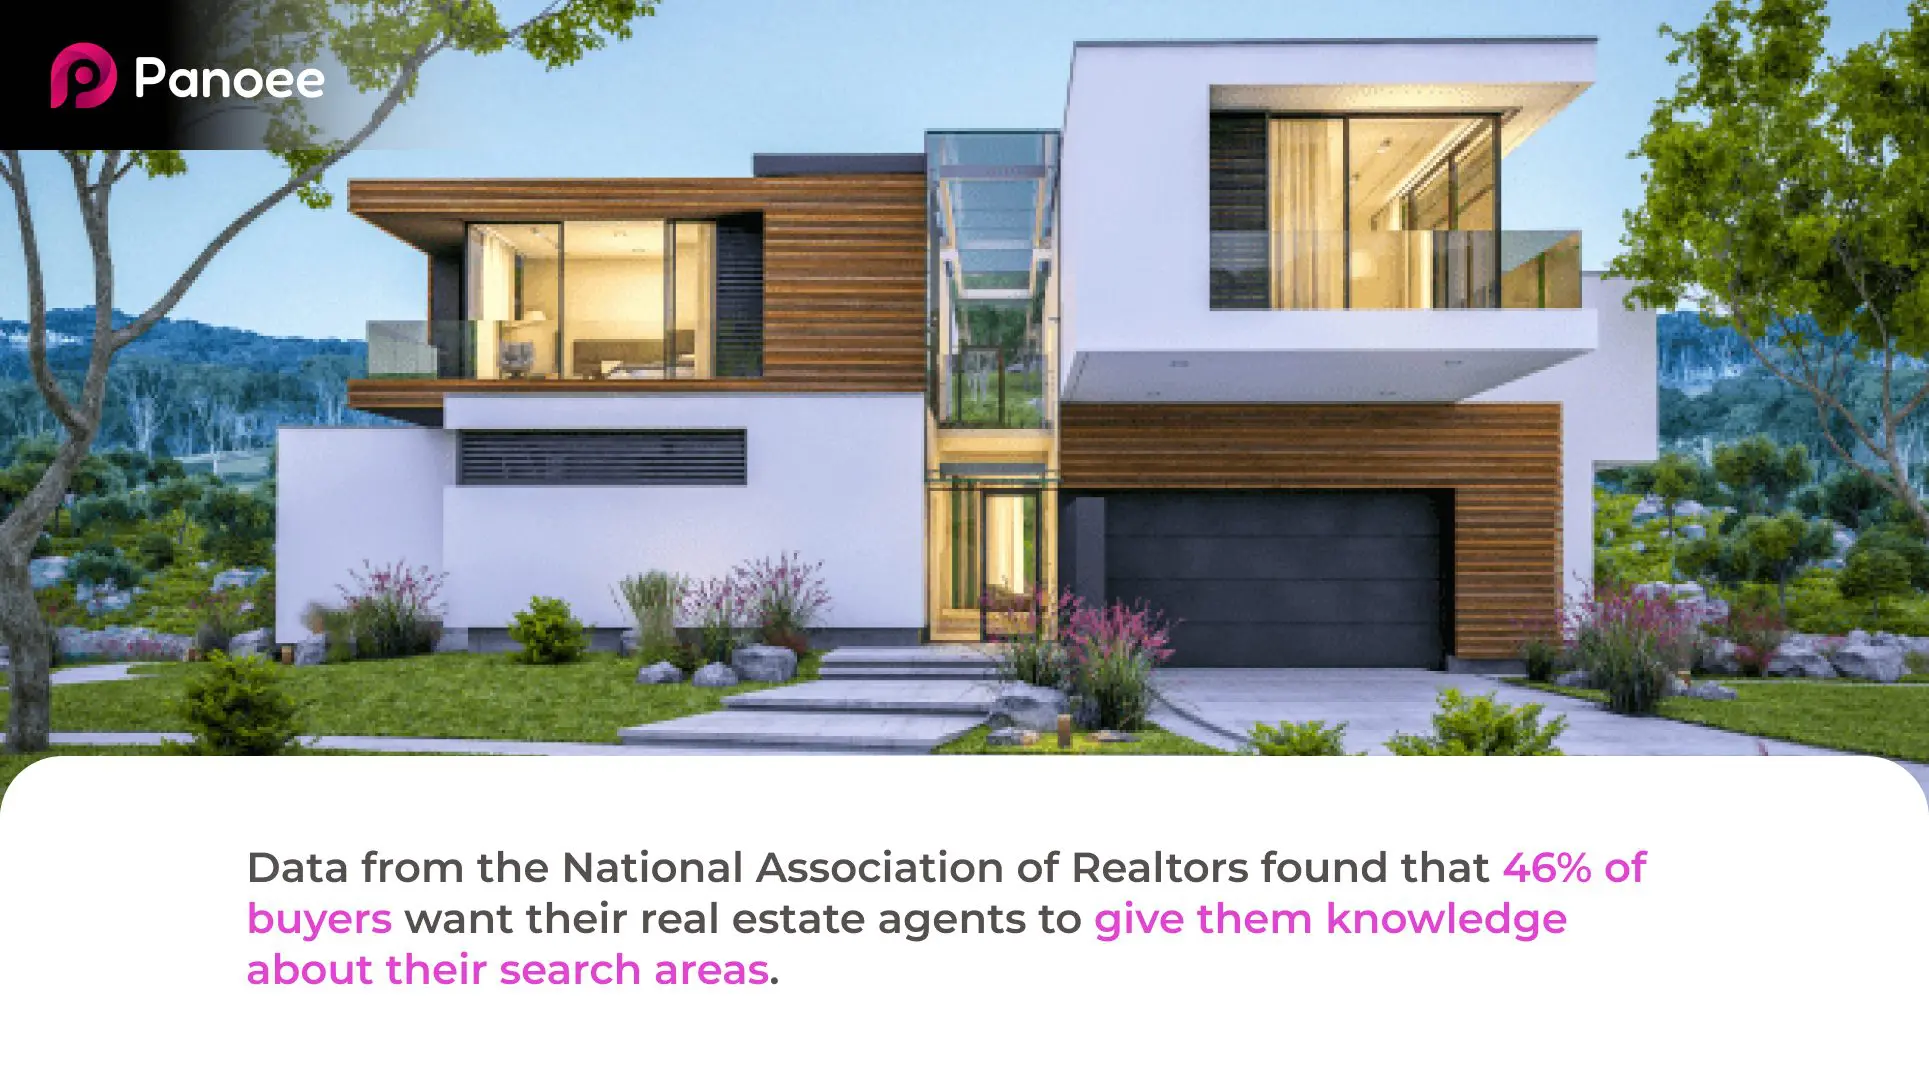 Buyers usually prefer real estate agents give them knowledge about their search areas